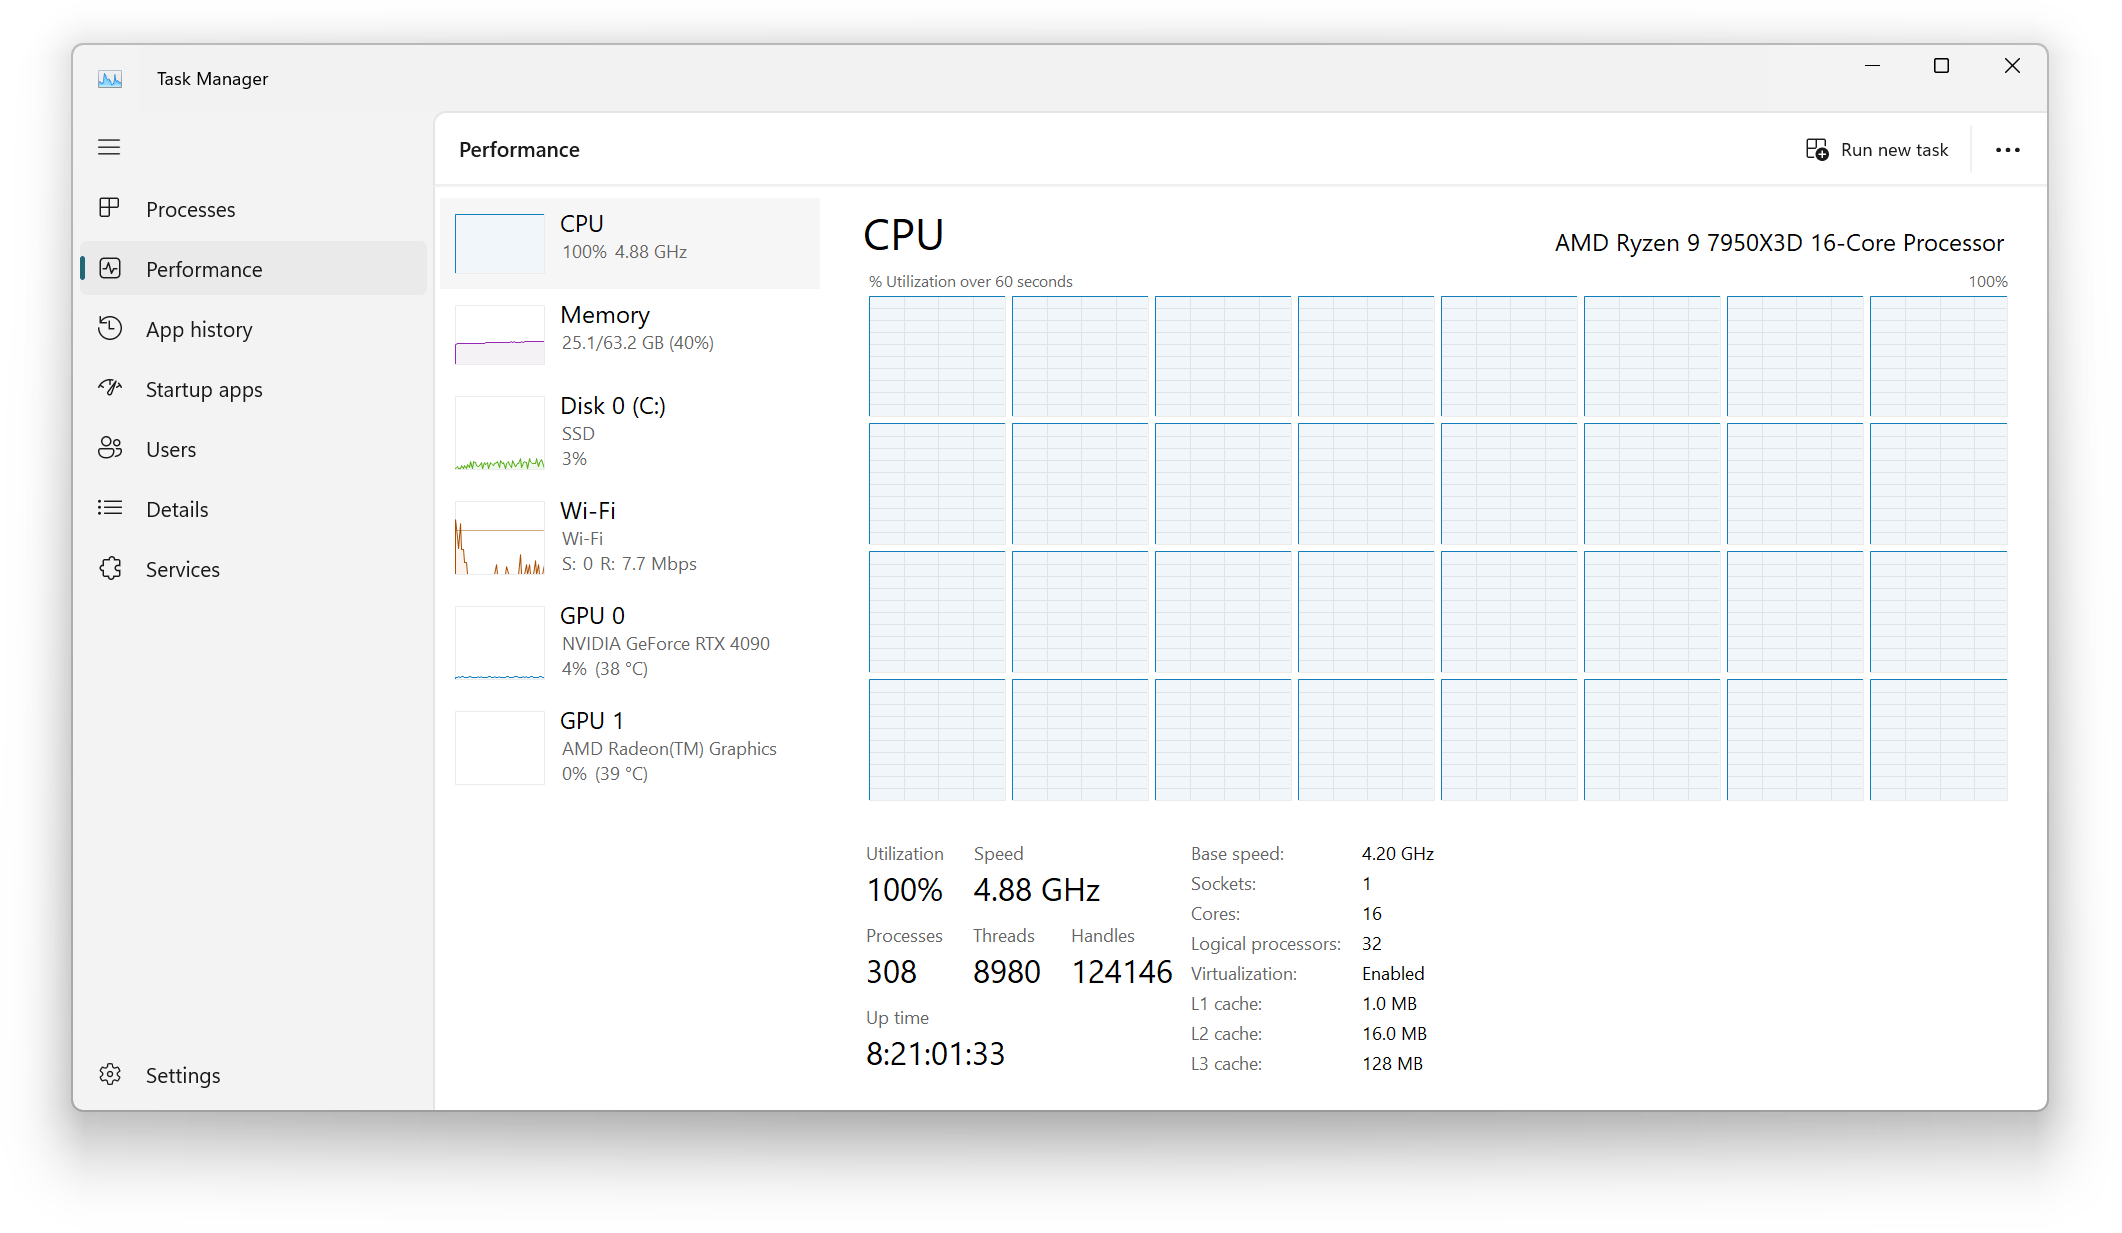 Running revdepcheck with 32 parallel workers on Ryzen 7950X3D (16 cores, 32 threads).